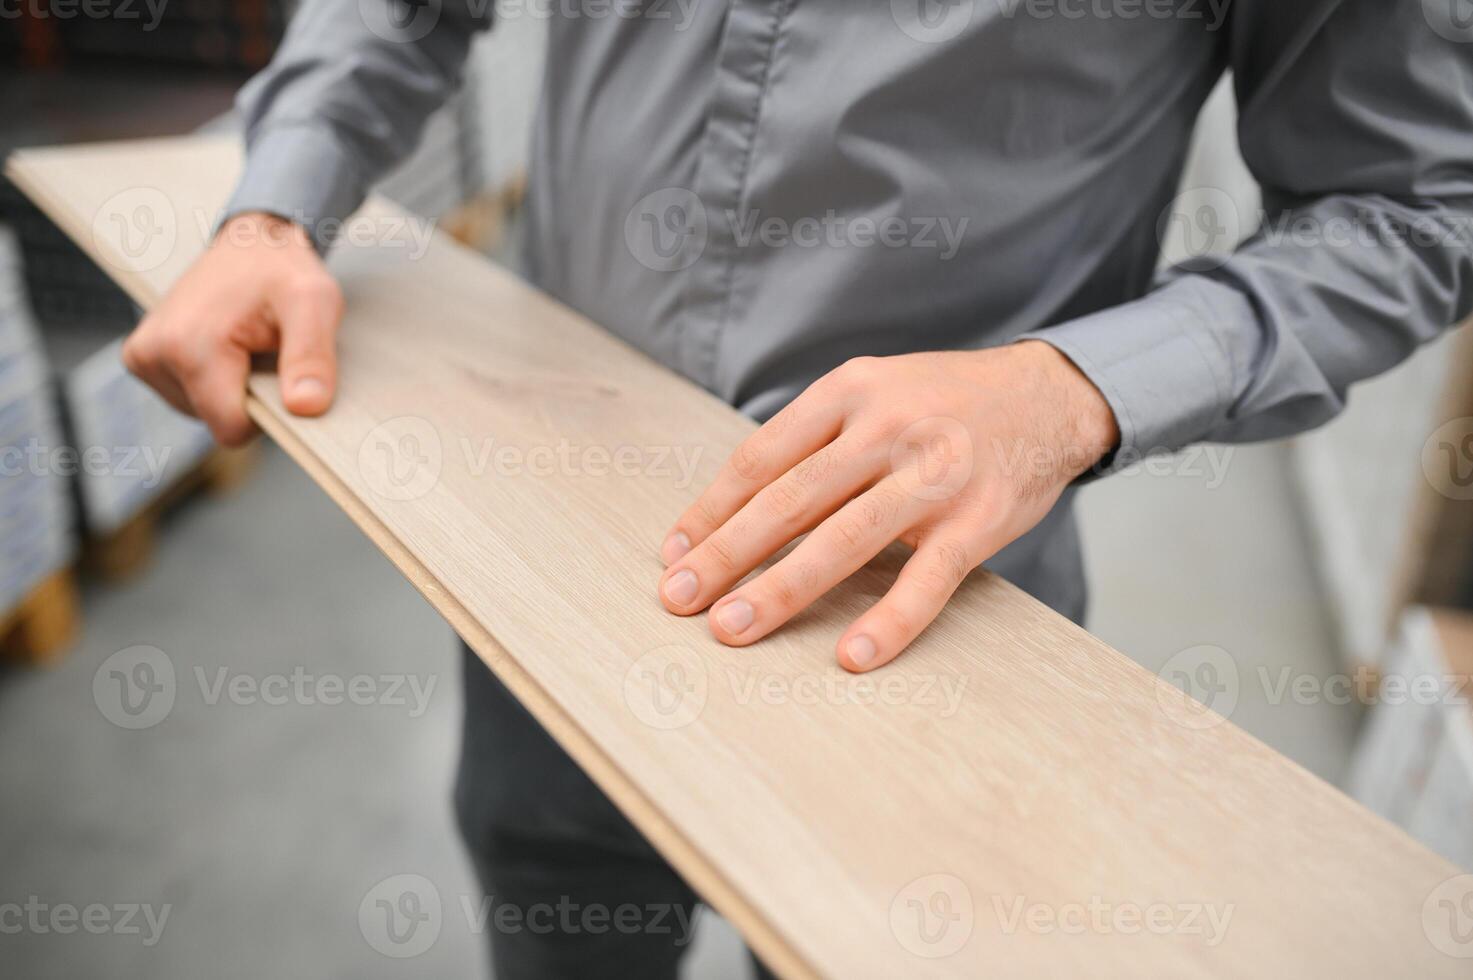 A young man chooses laminate flooring in the hardware store photo